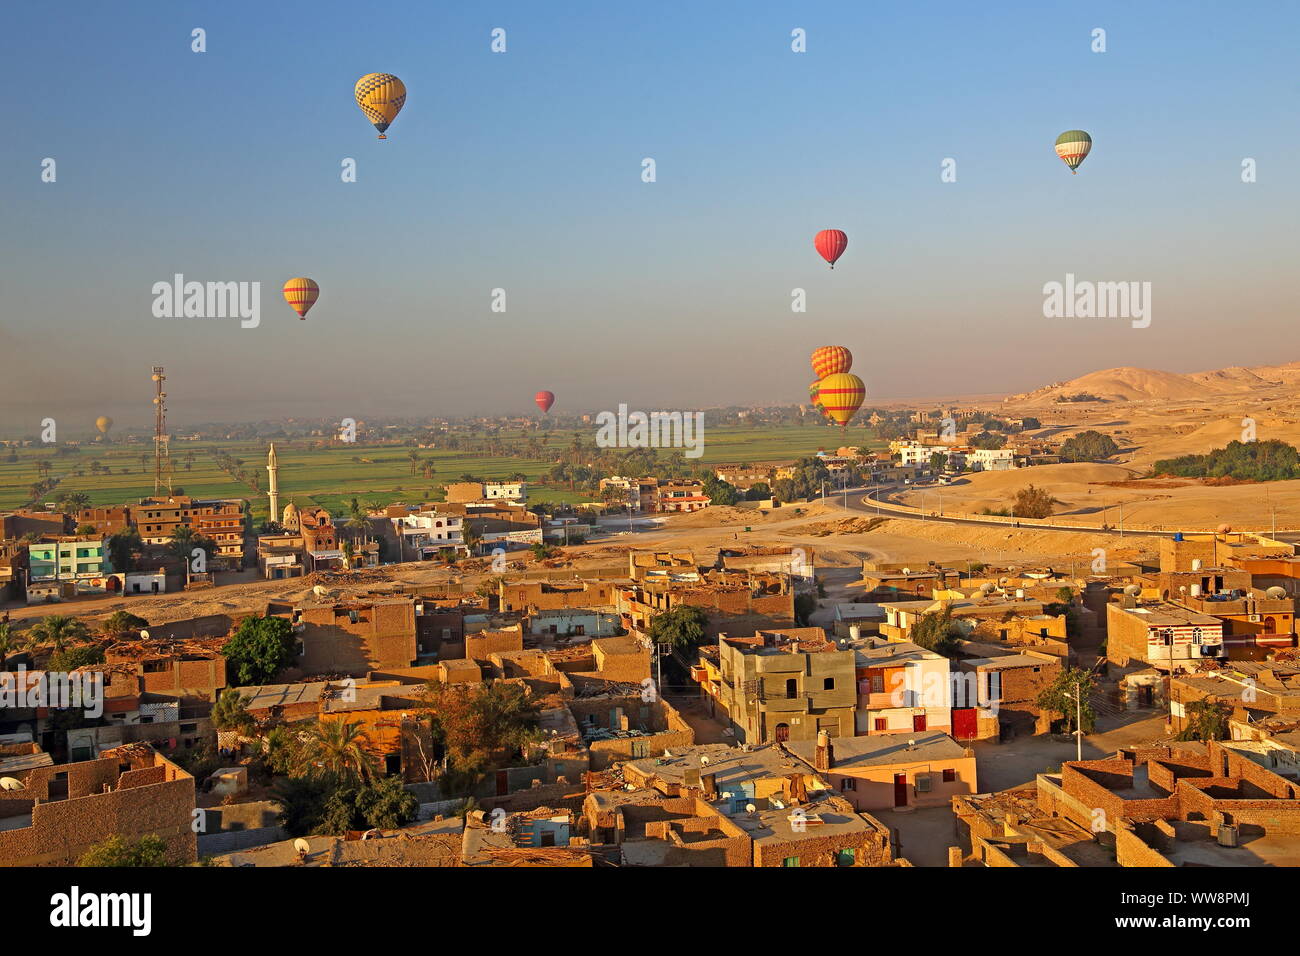 Hot air balloons over fruit land and desert edge with Fellachendorf in Theben-West, Luxor, Upper Egypt, Egypt Stock Photo